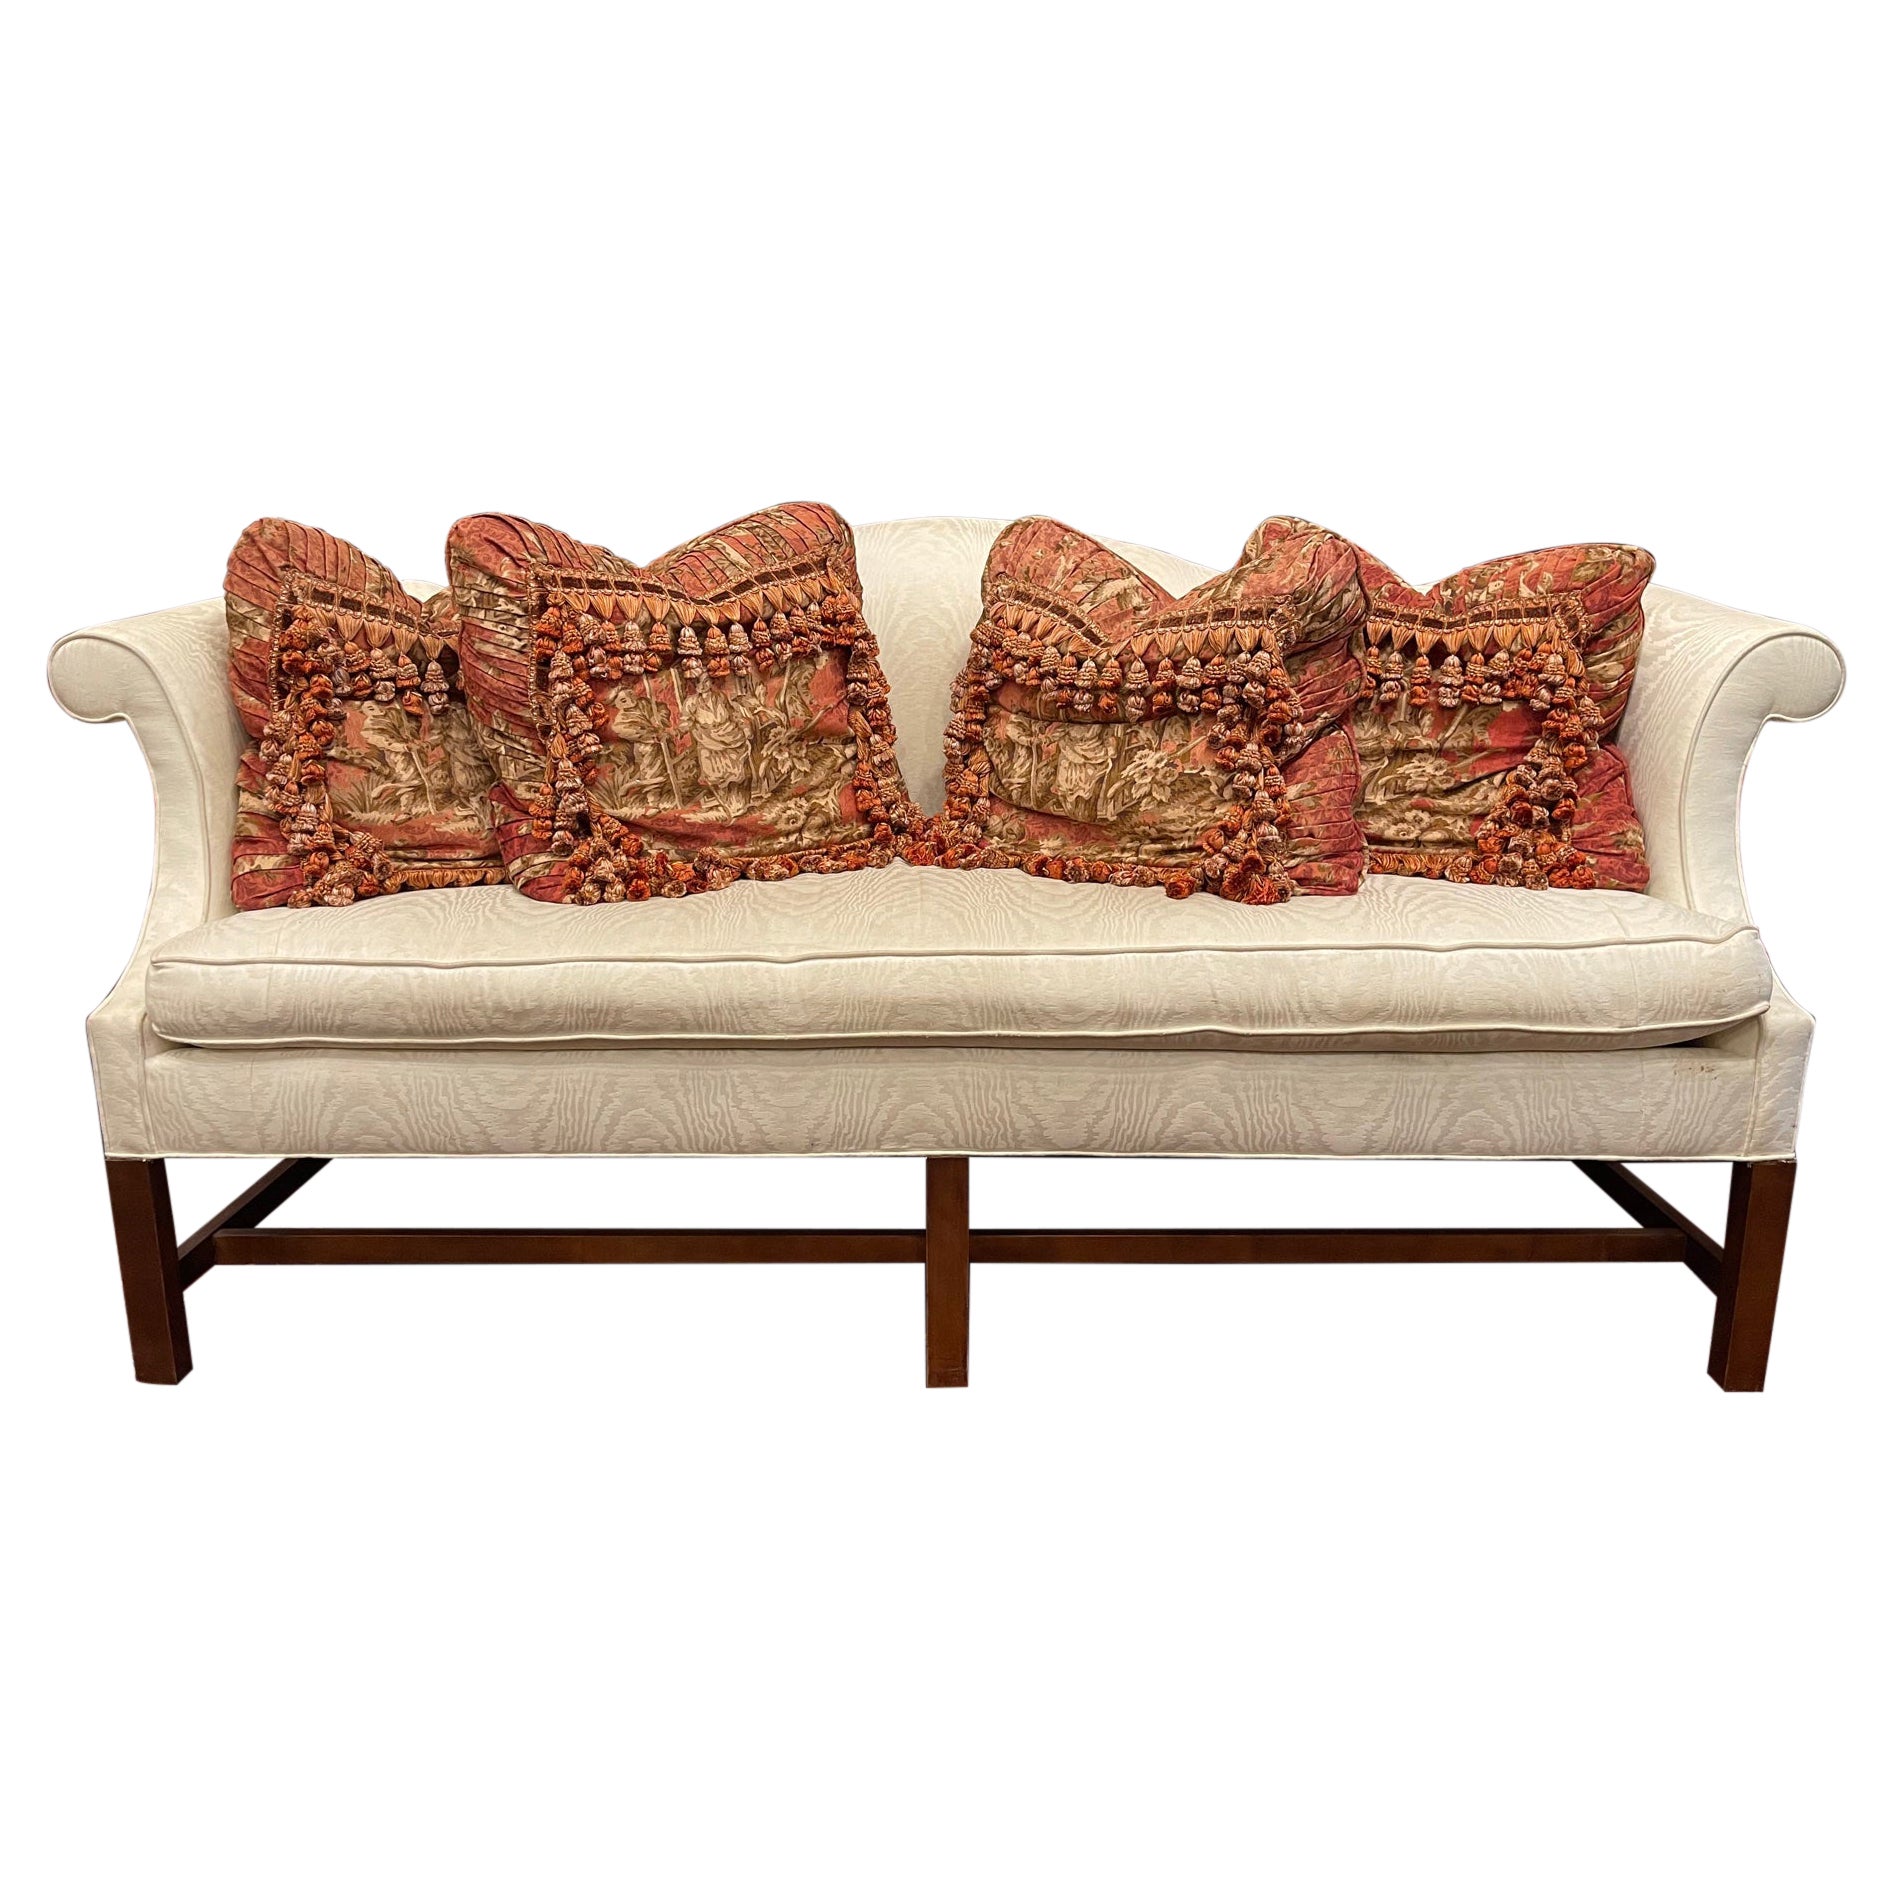 Chippendale Style Camelback Sofa with a Single Seat Cushion, 20th Century For Sale